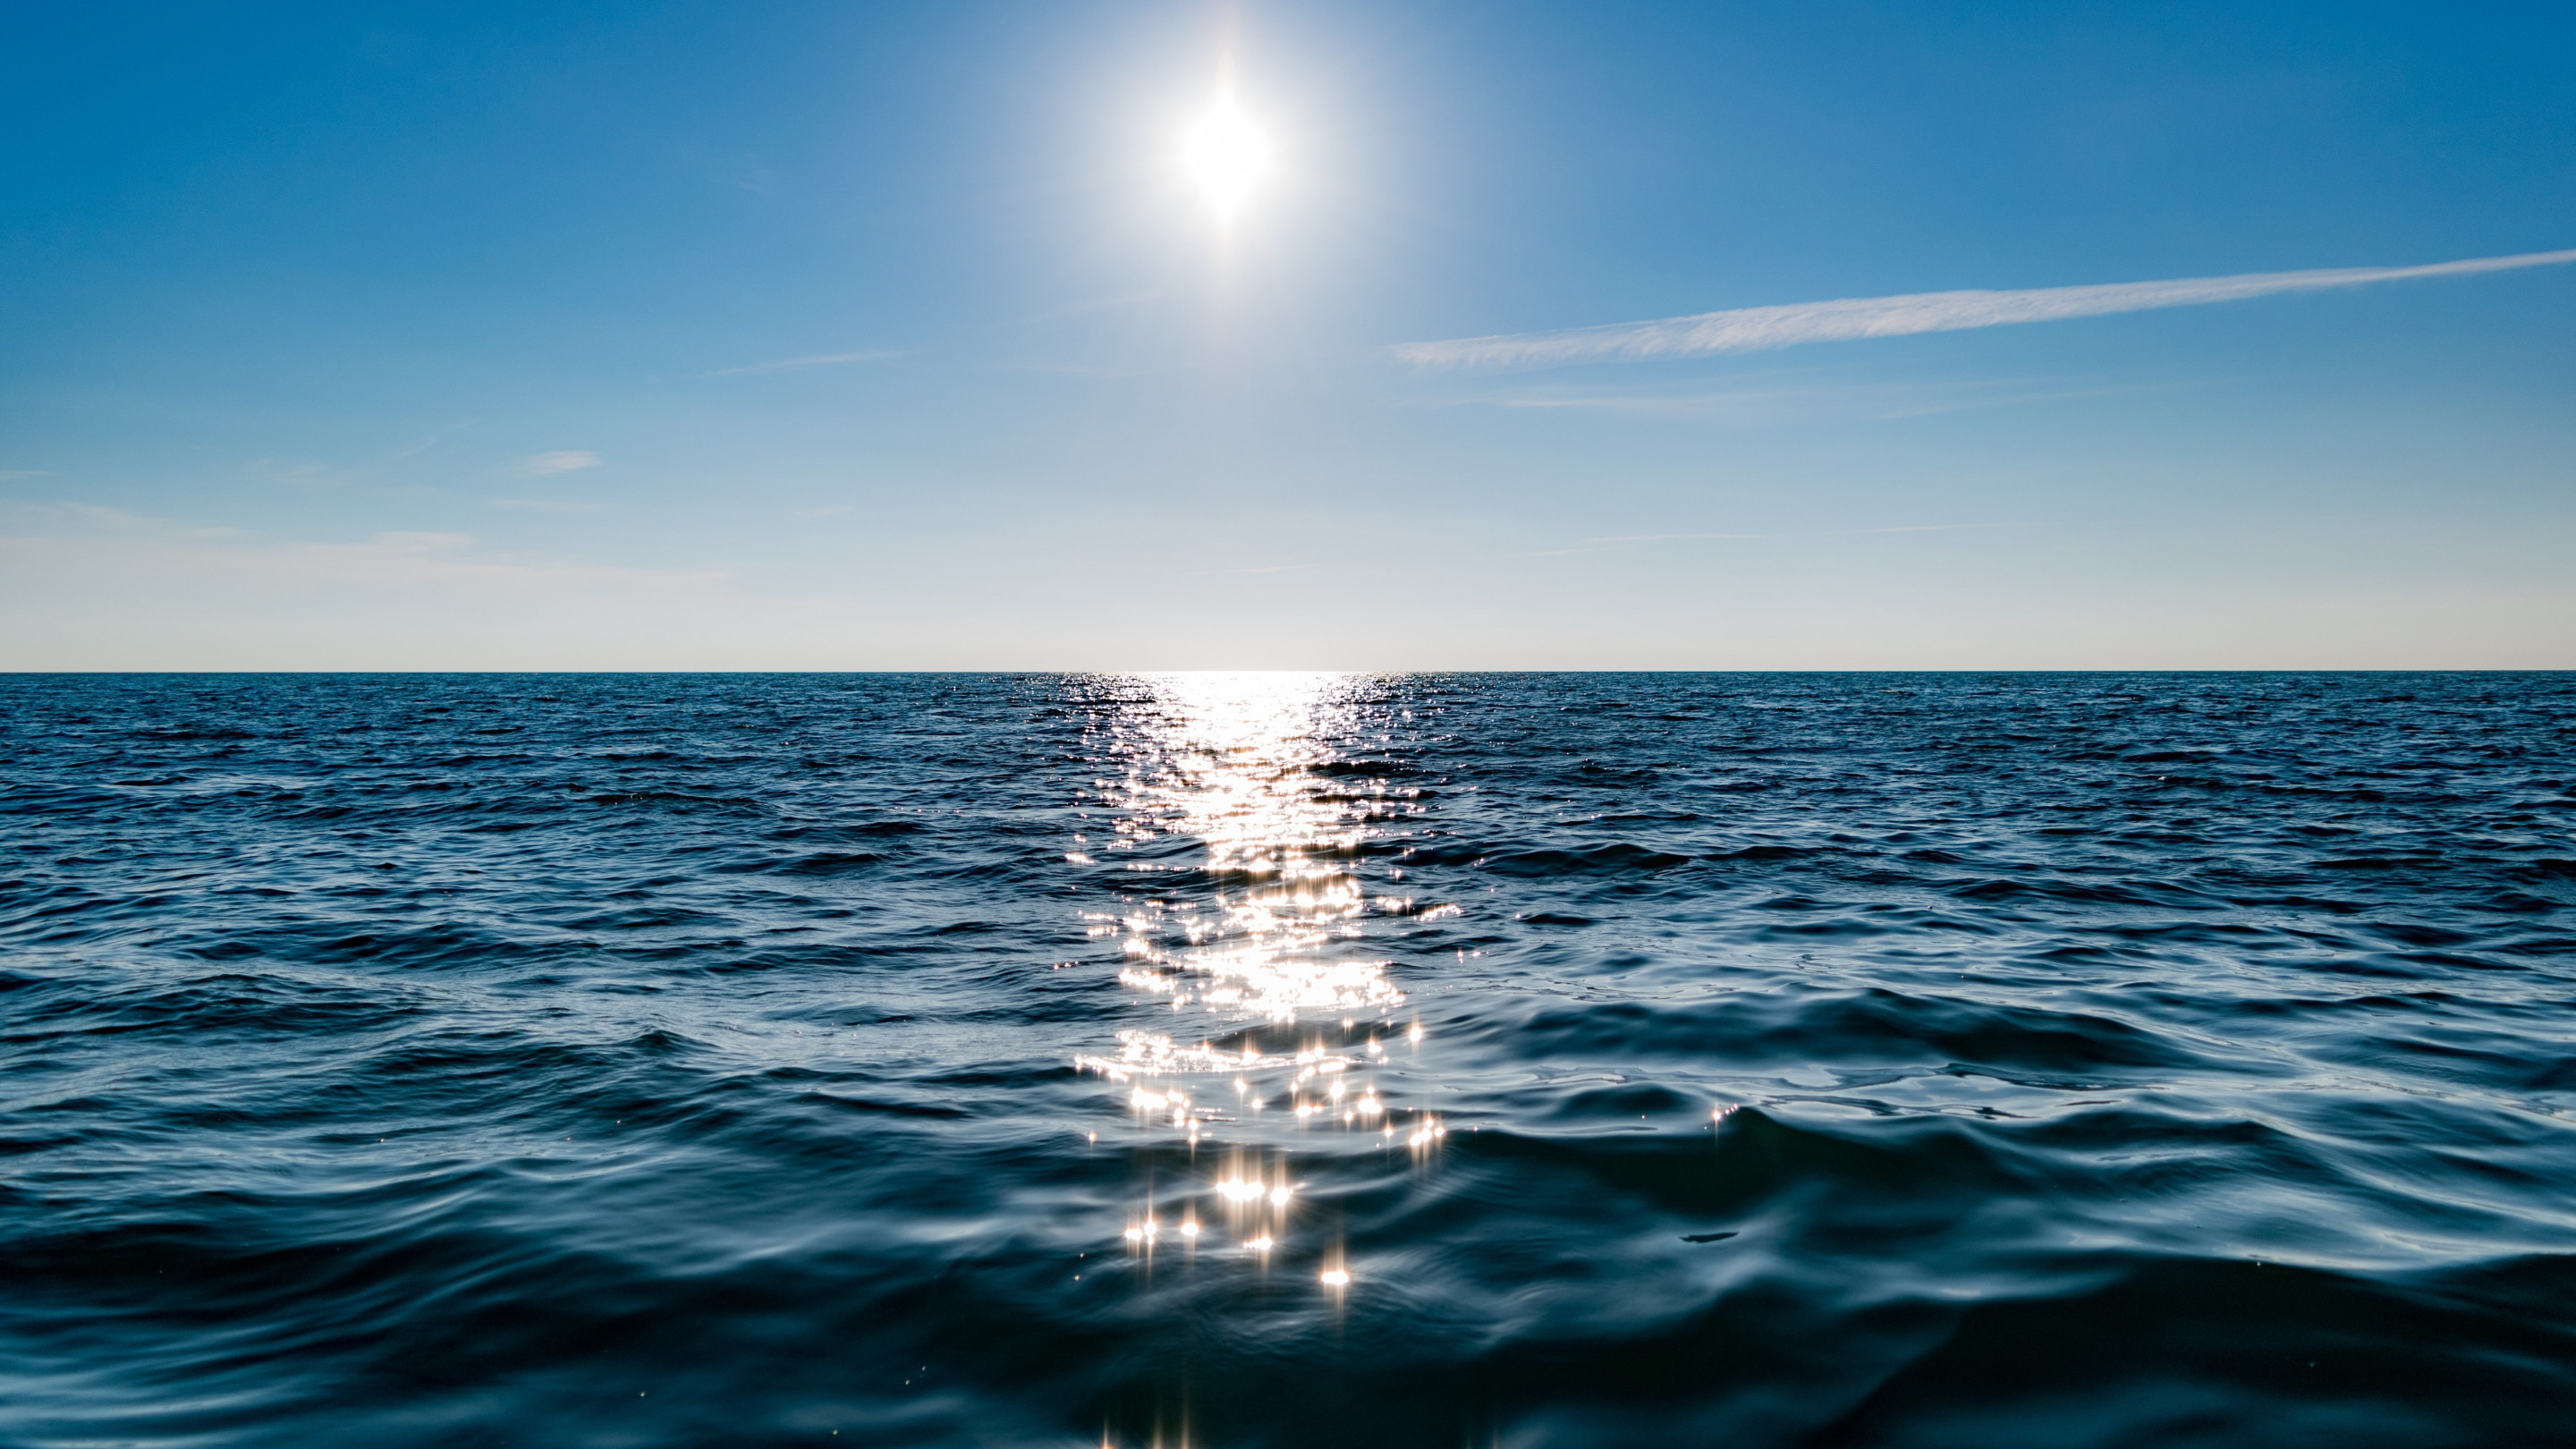 Sun on blue sky is reflected on water wallpaper 2880x1620